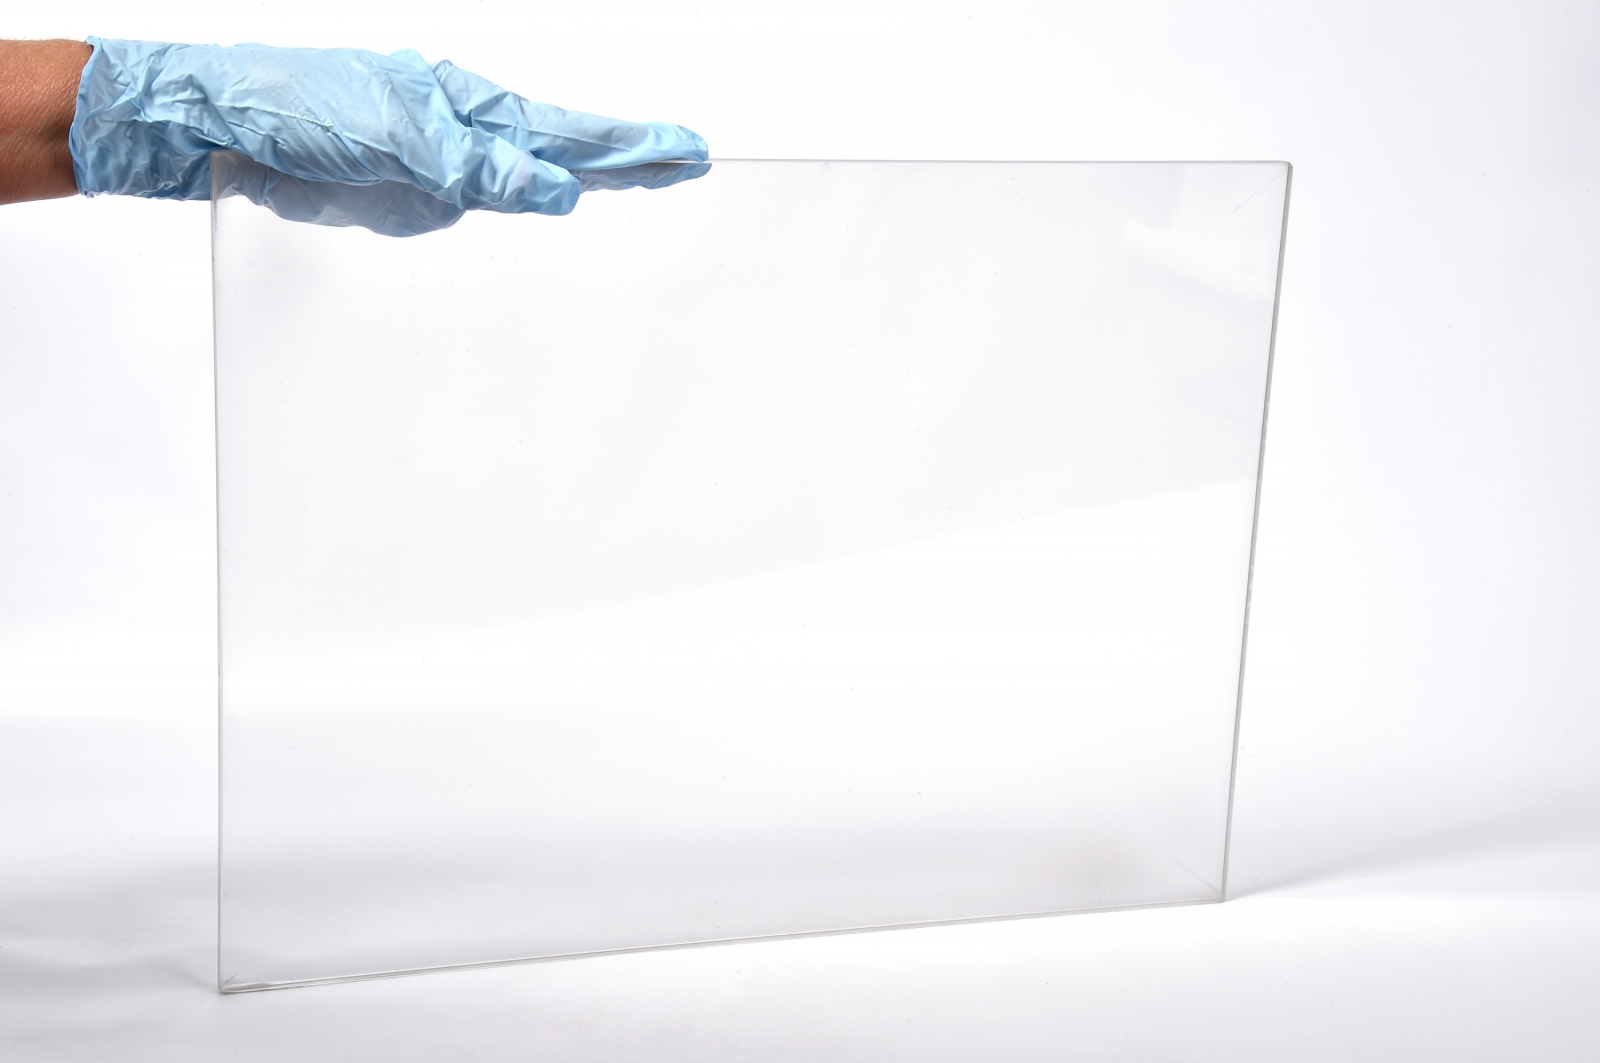 US Navy invents bulletproof glass from clay that could revolutionise